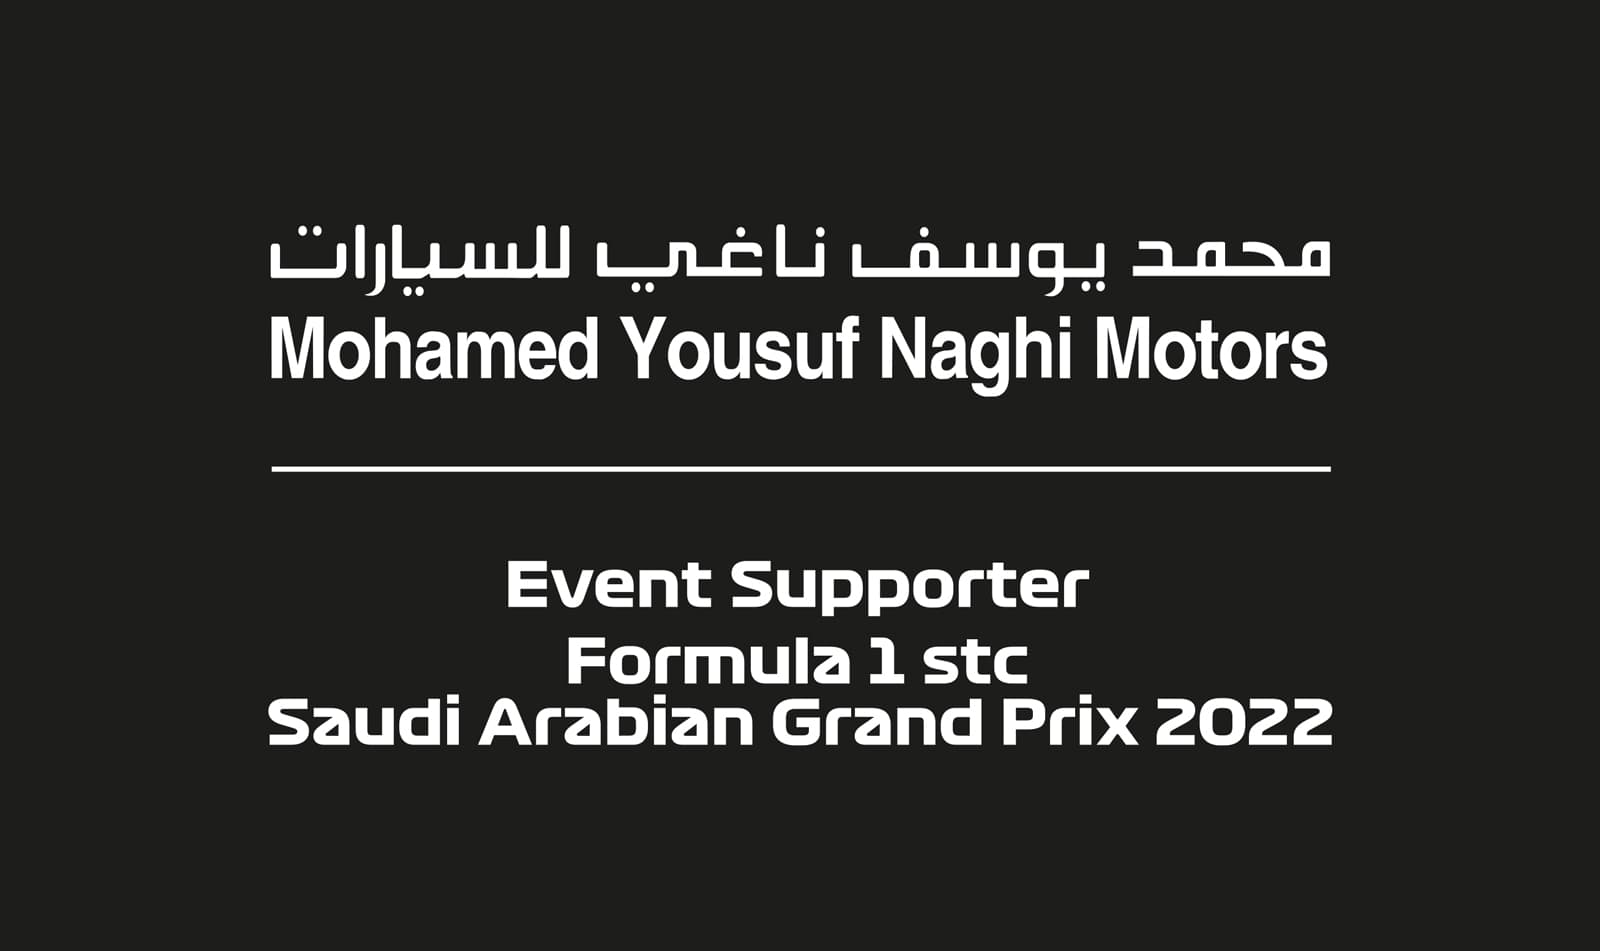 Mohamed Yousuf Naghi Announced as Official Sponsor of the FORMULA 1 